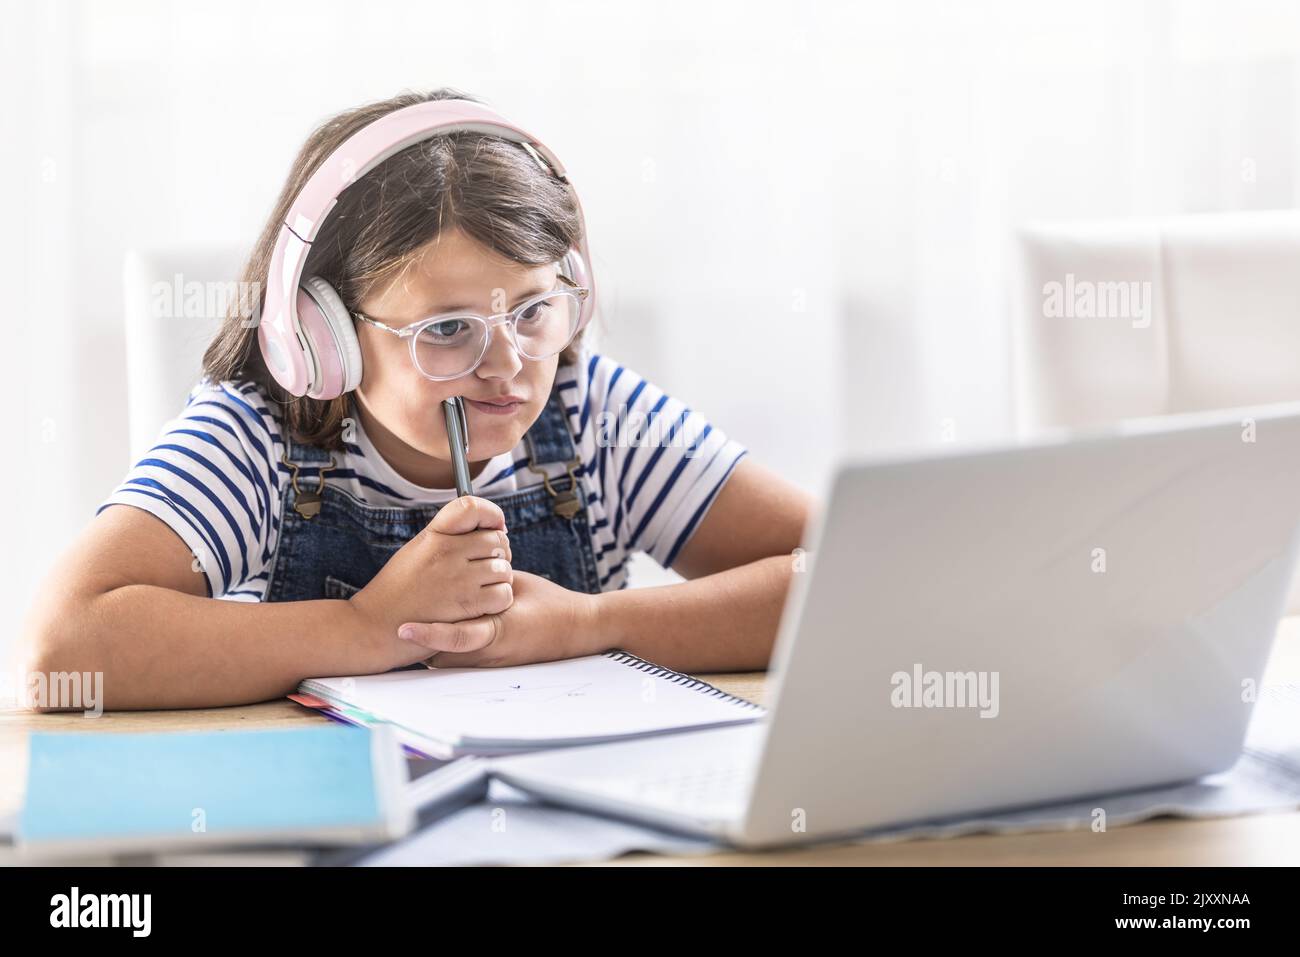 Girl in headphones wears glasses and leans agains her pencil trying to understand things she studies online. Stock Photo